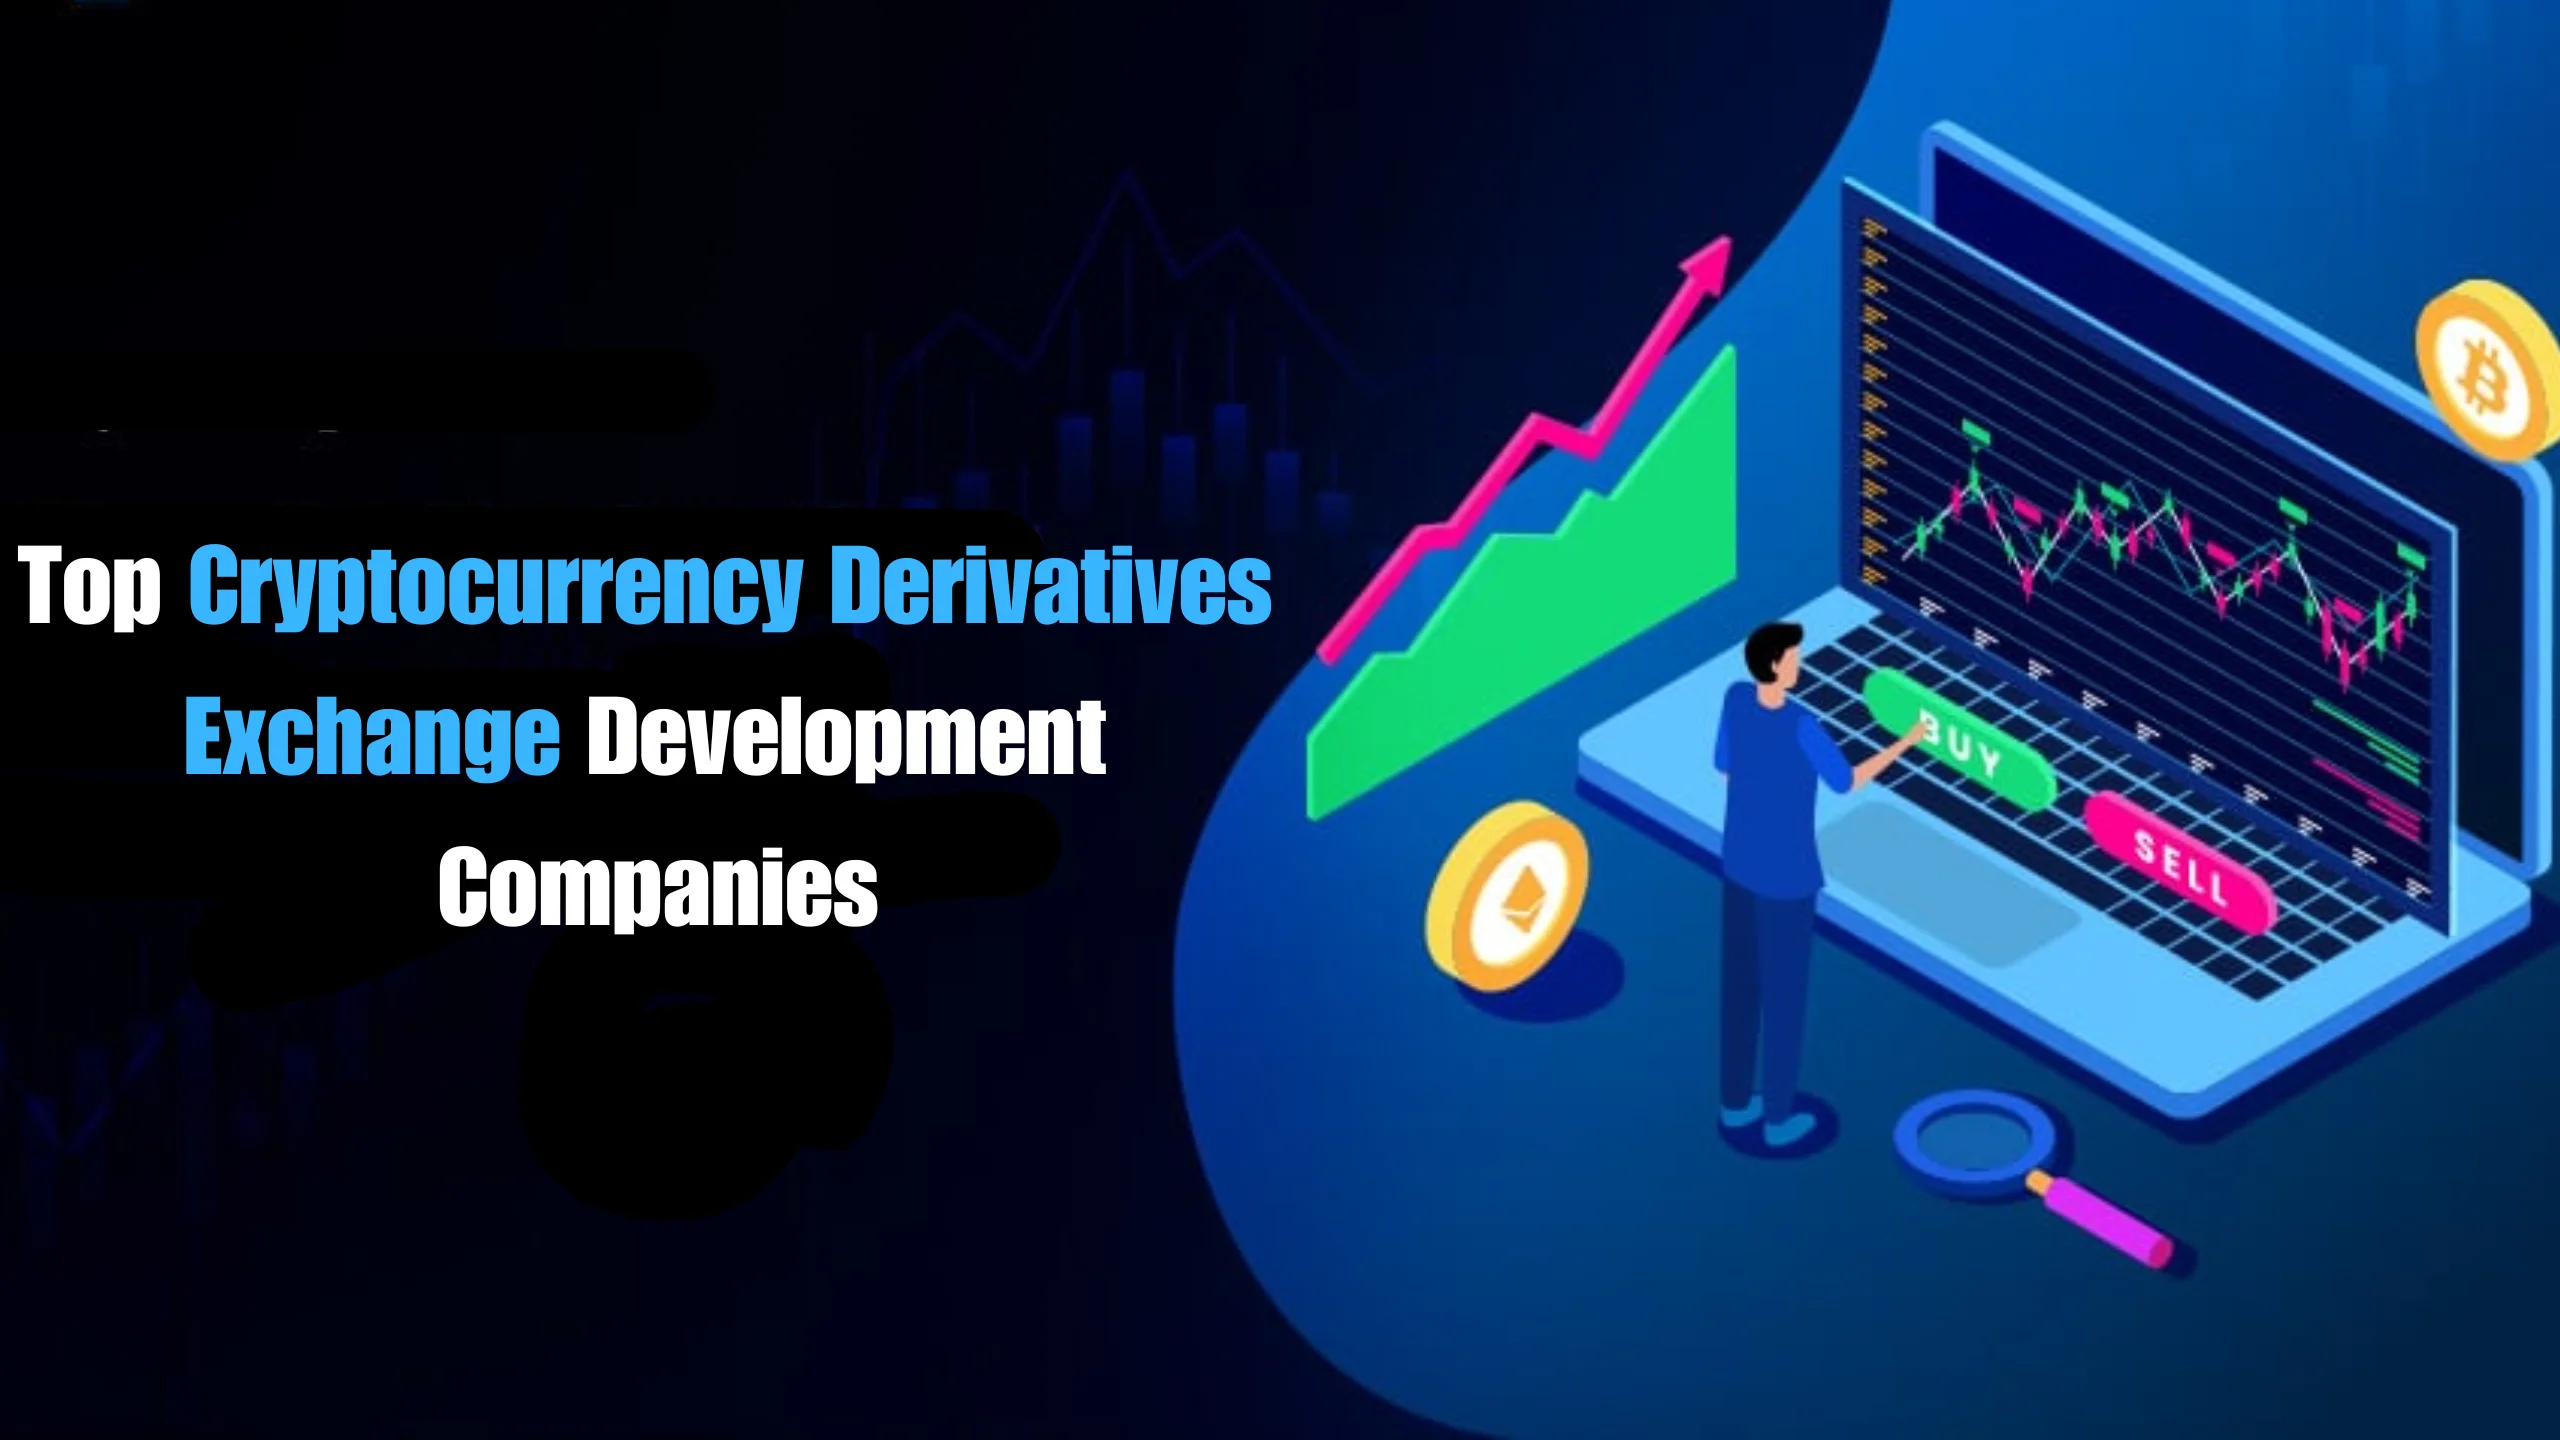 Explore the top companies specializing in cryptocurrency derivatives exchange development.